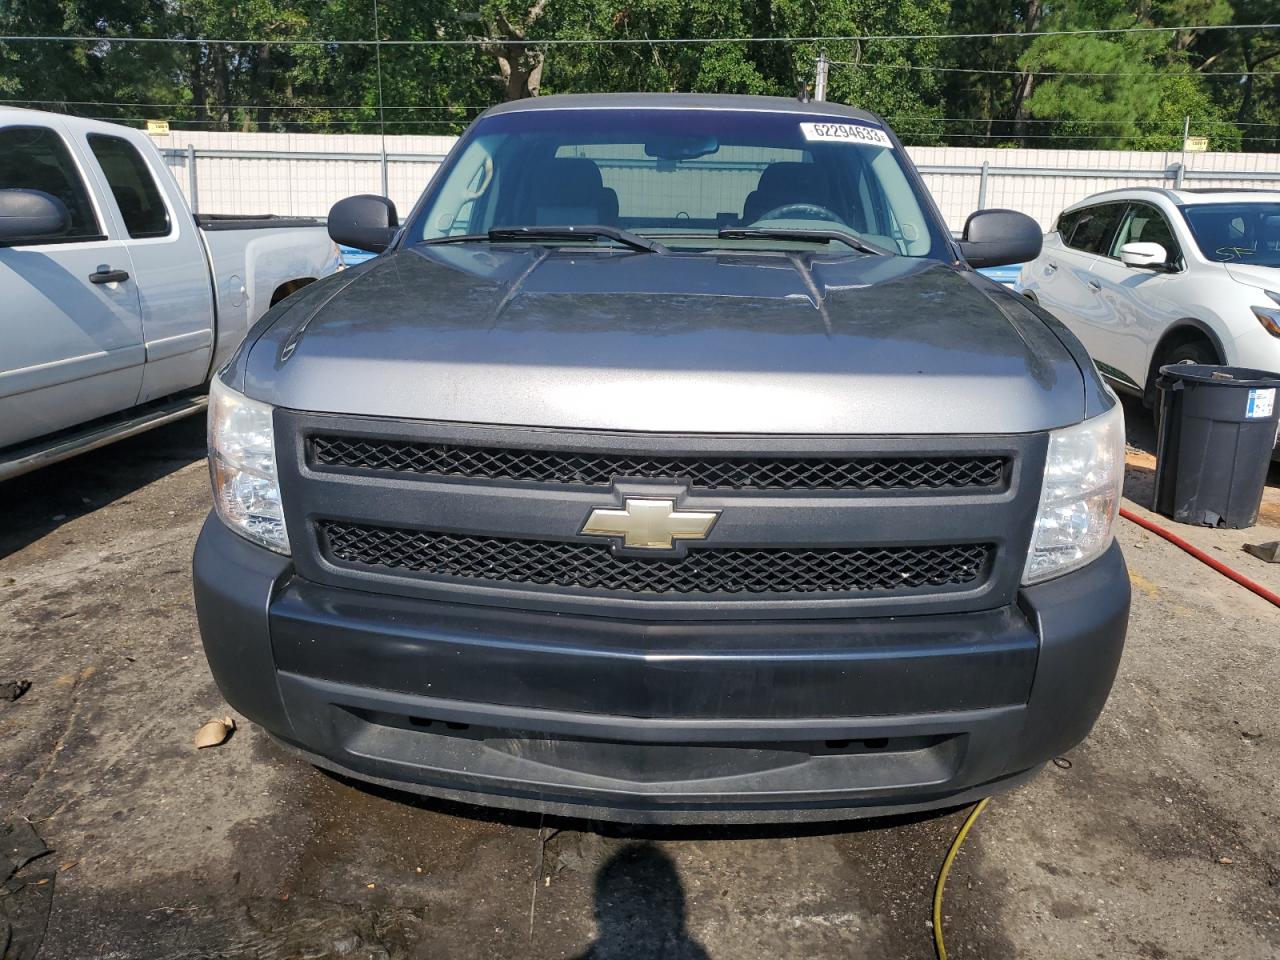 2GCEC19C881****** Used and Repairable 2008 Chevrolet Silverado 1500 in Alabama State